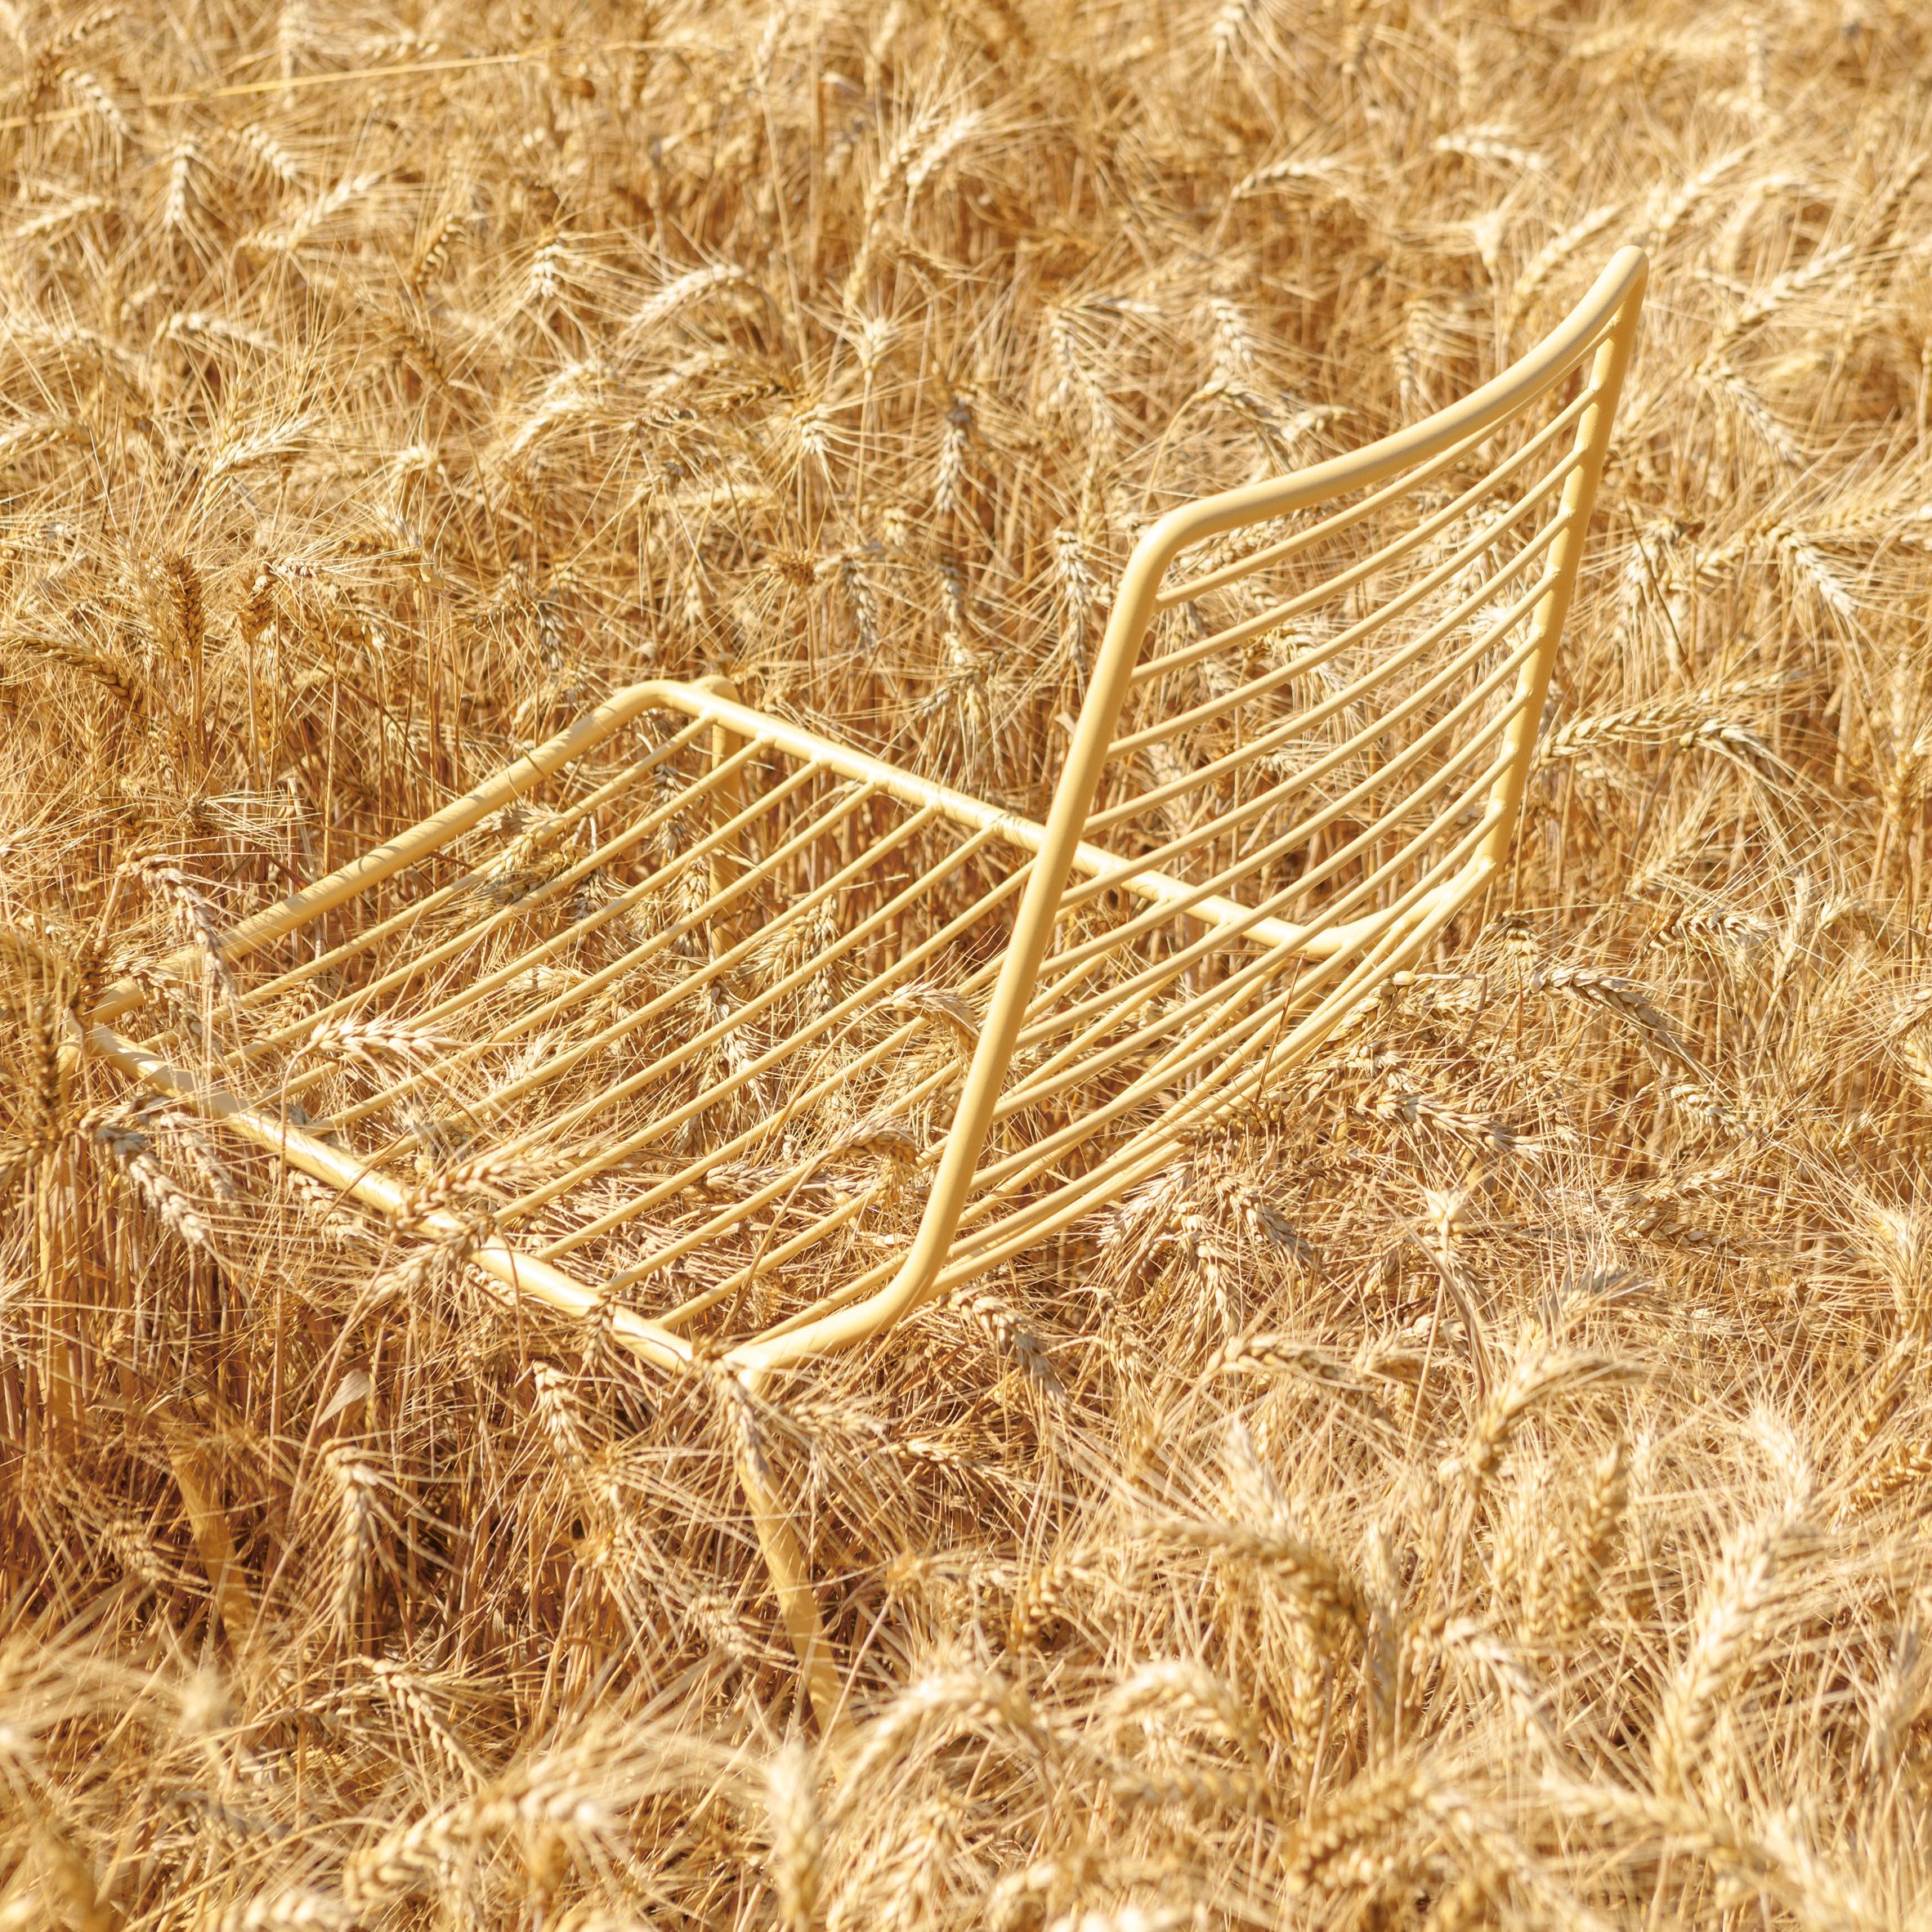 Yellow chair in field of yellow wheat